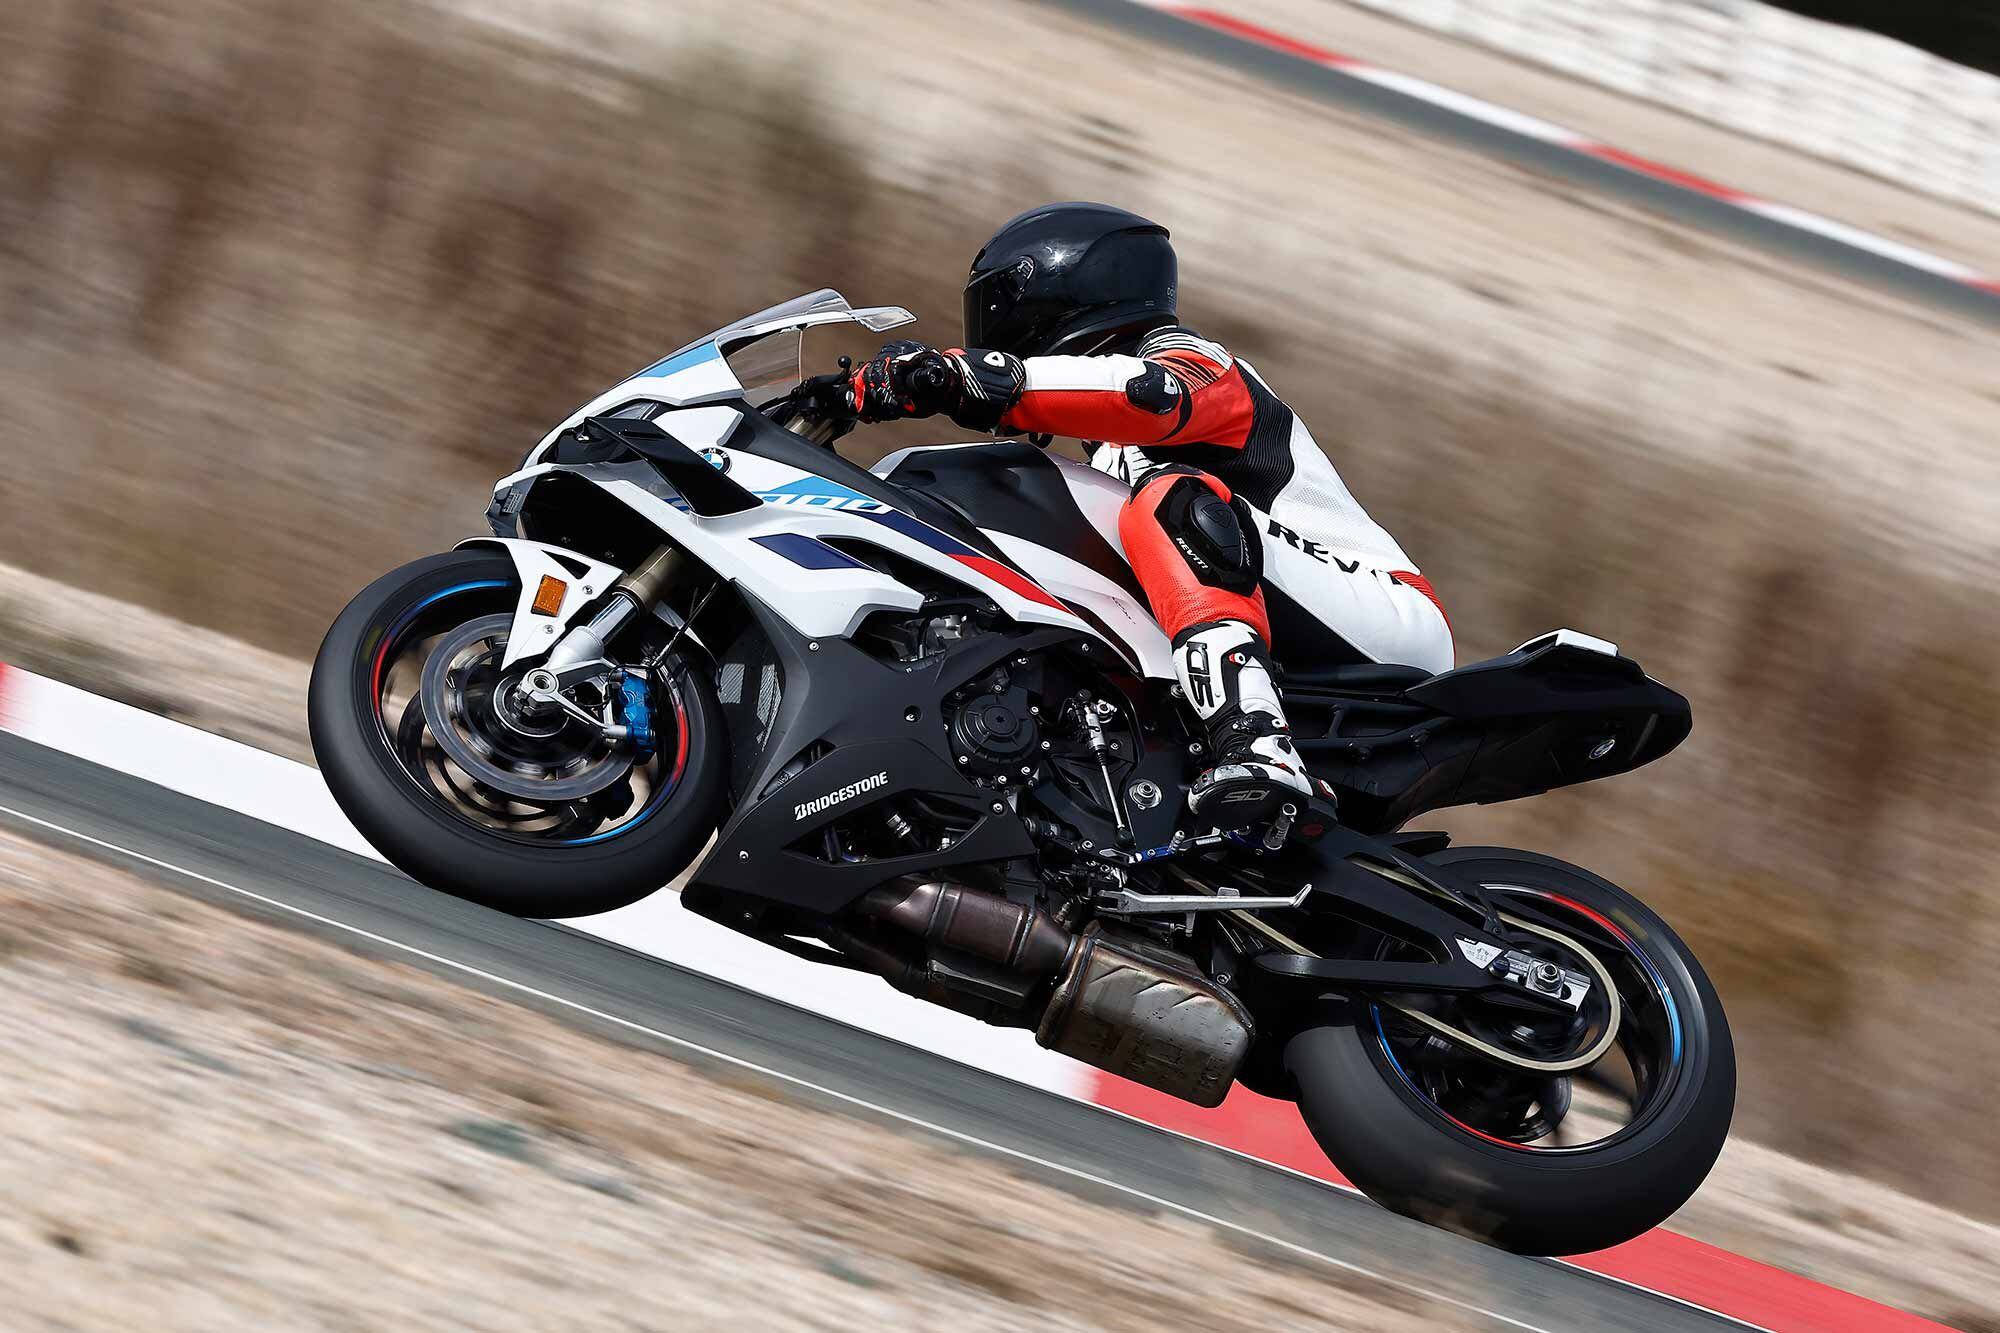 It doesn’t take long to realize that the S 1000 RR makes going “fast” easy.